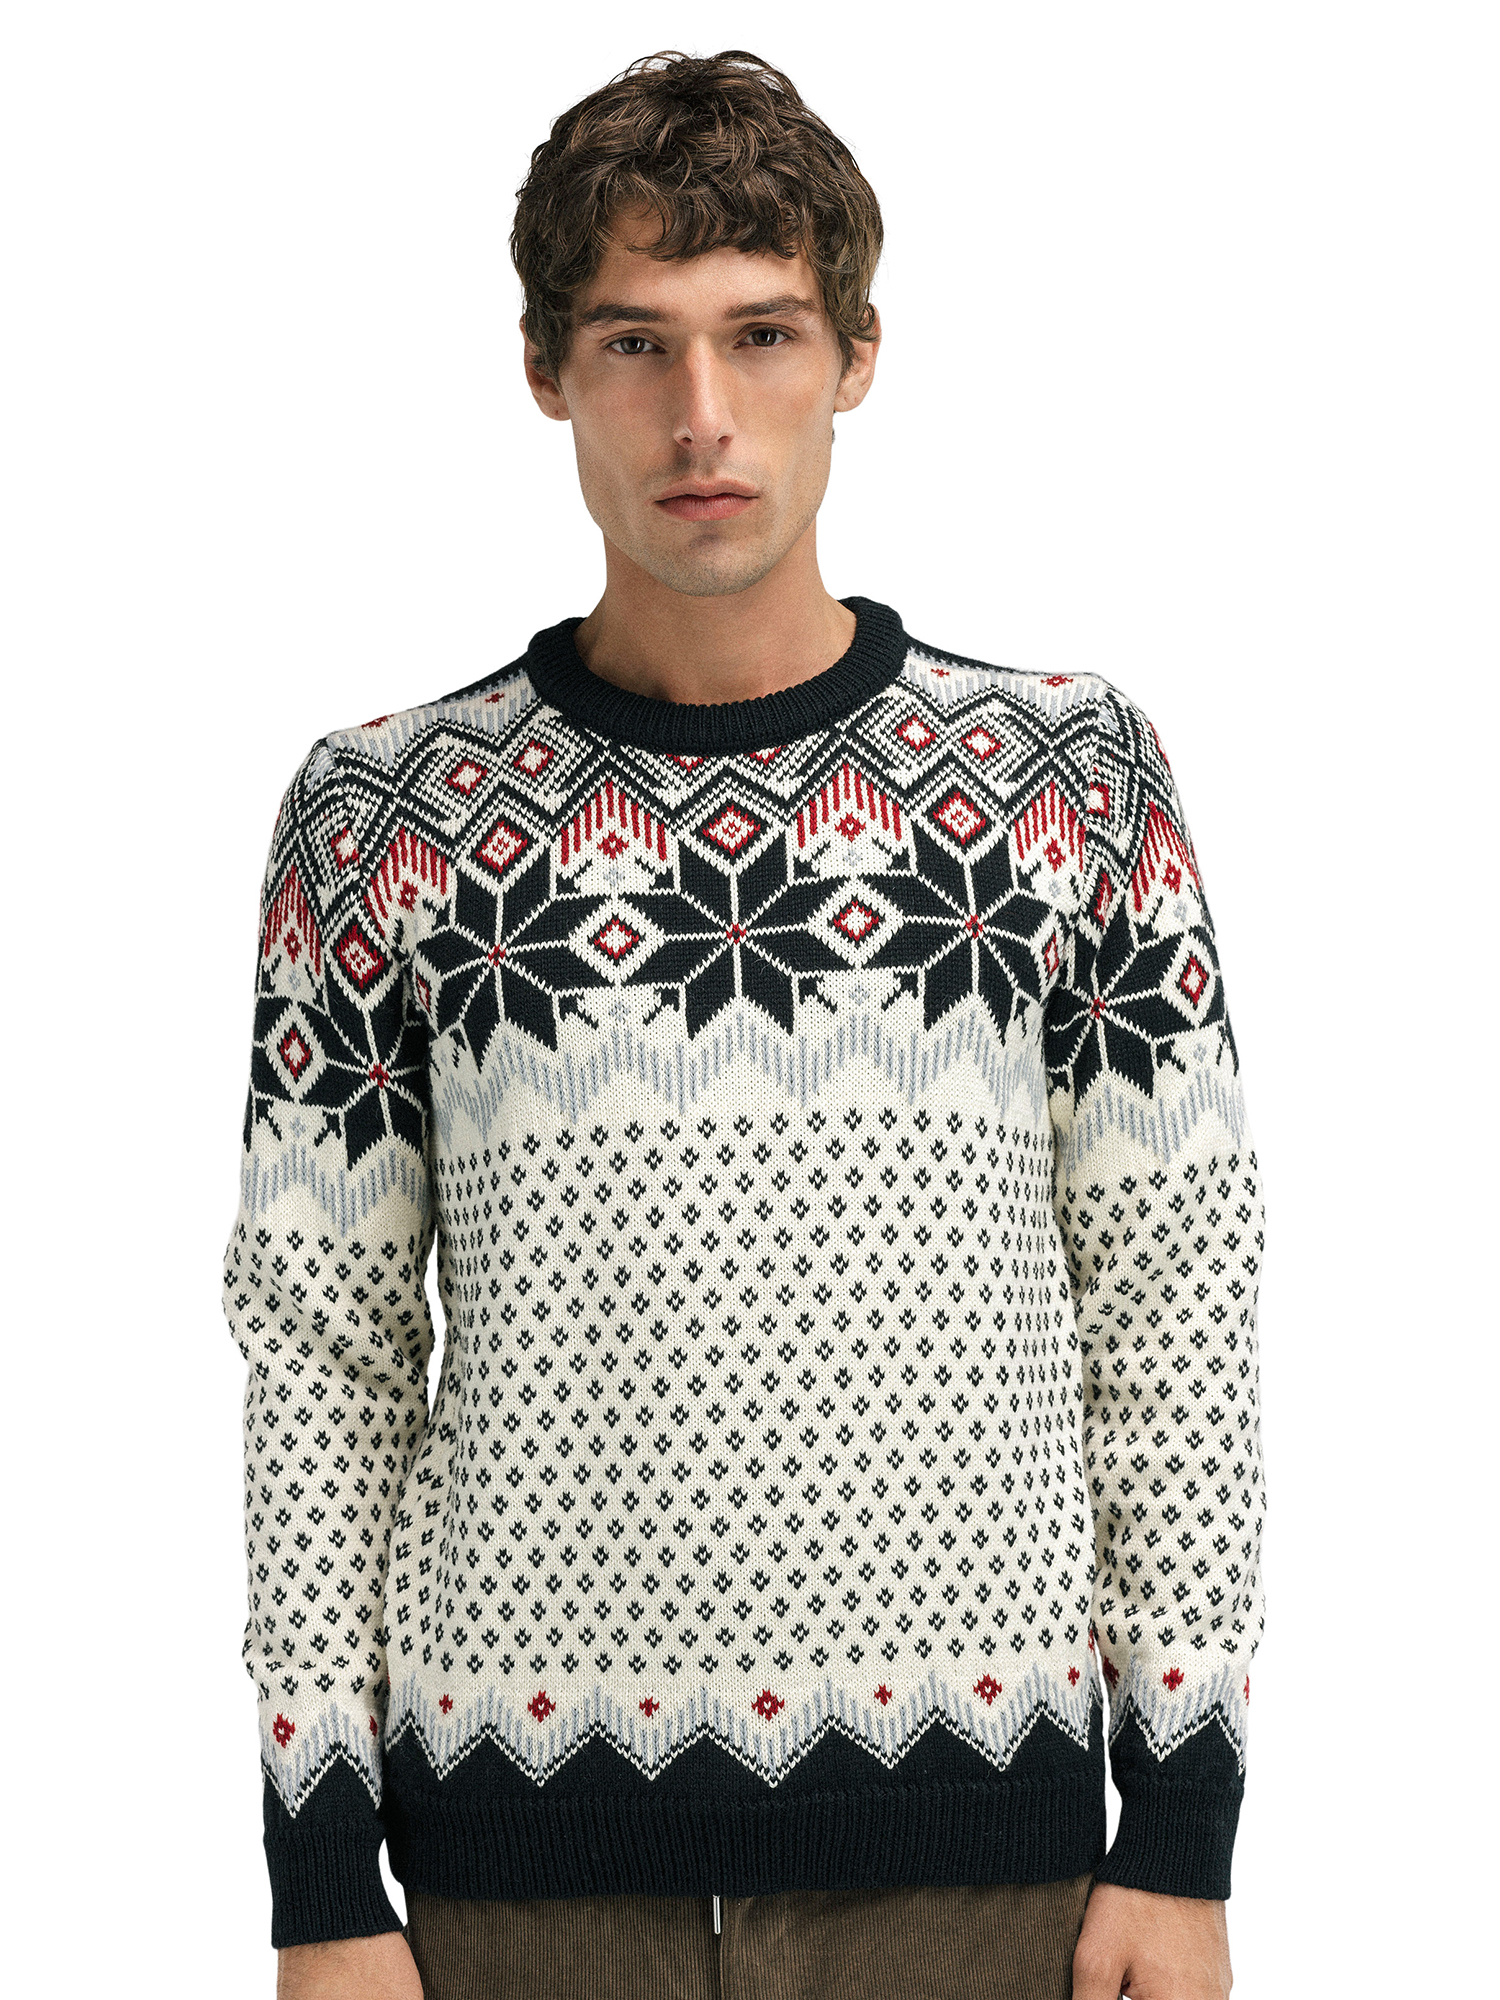 Vegard Sweater - Men - Black/OffWhite - Dale of Norway - Dale of